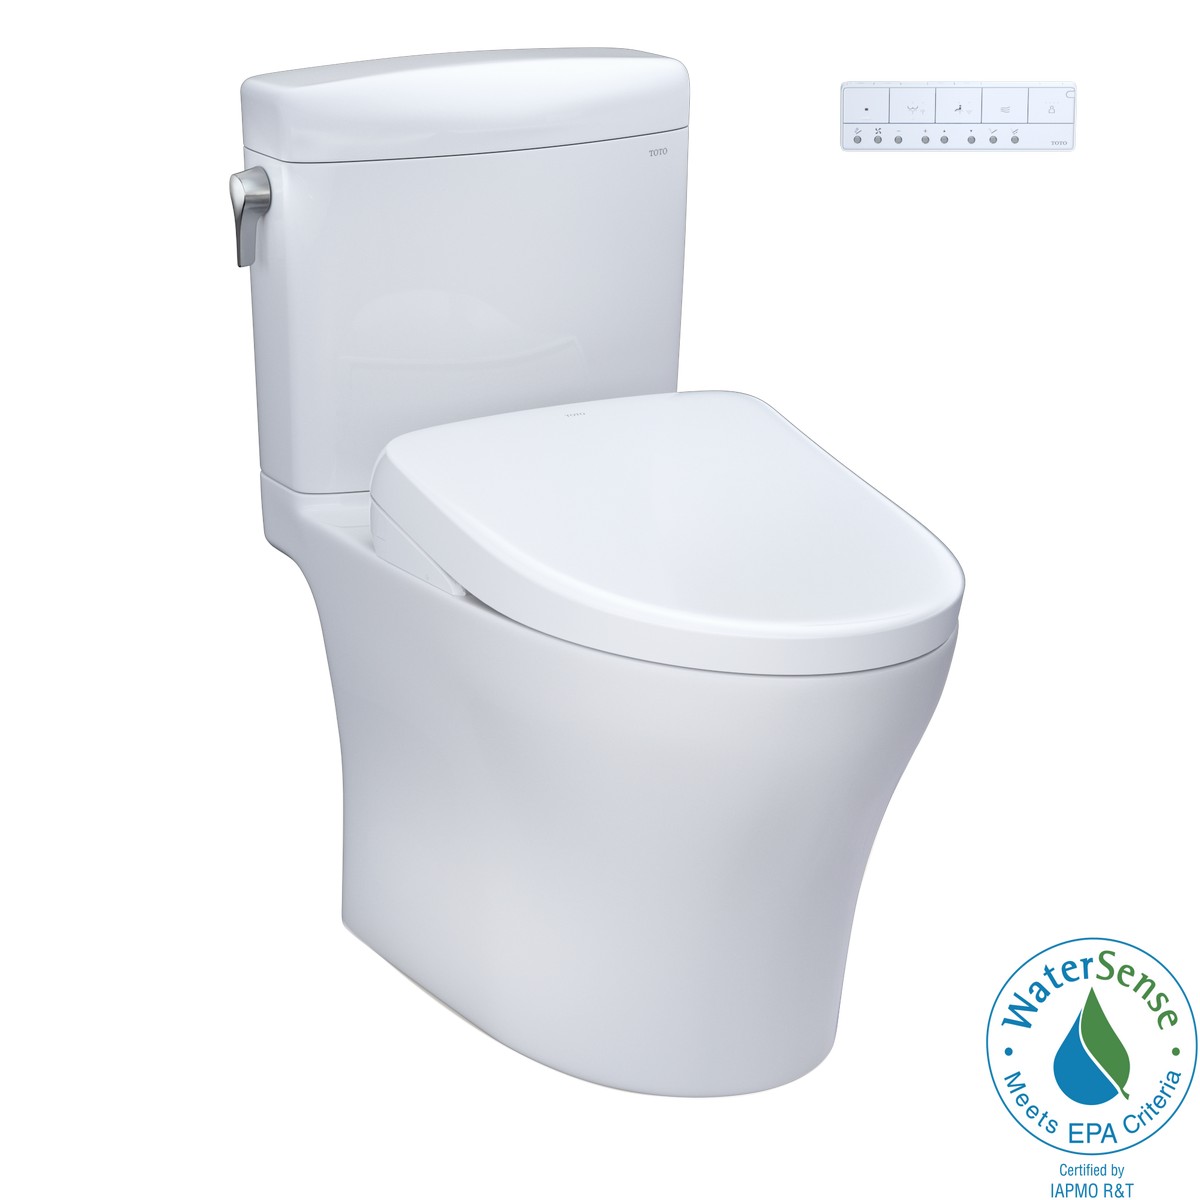 TOTO MW4364726CEMFG#01 WASHLET+ AQUIA IV CUBE 1.28 AND 0.9 GPF TWO PIECE DUAL FLUSH ELONGATED TOILET WITH WASHLET S7 BIDET SEAT IN COTTON WHITE